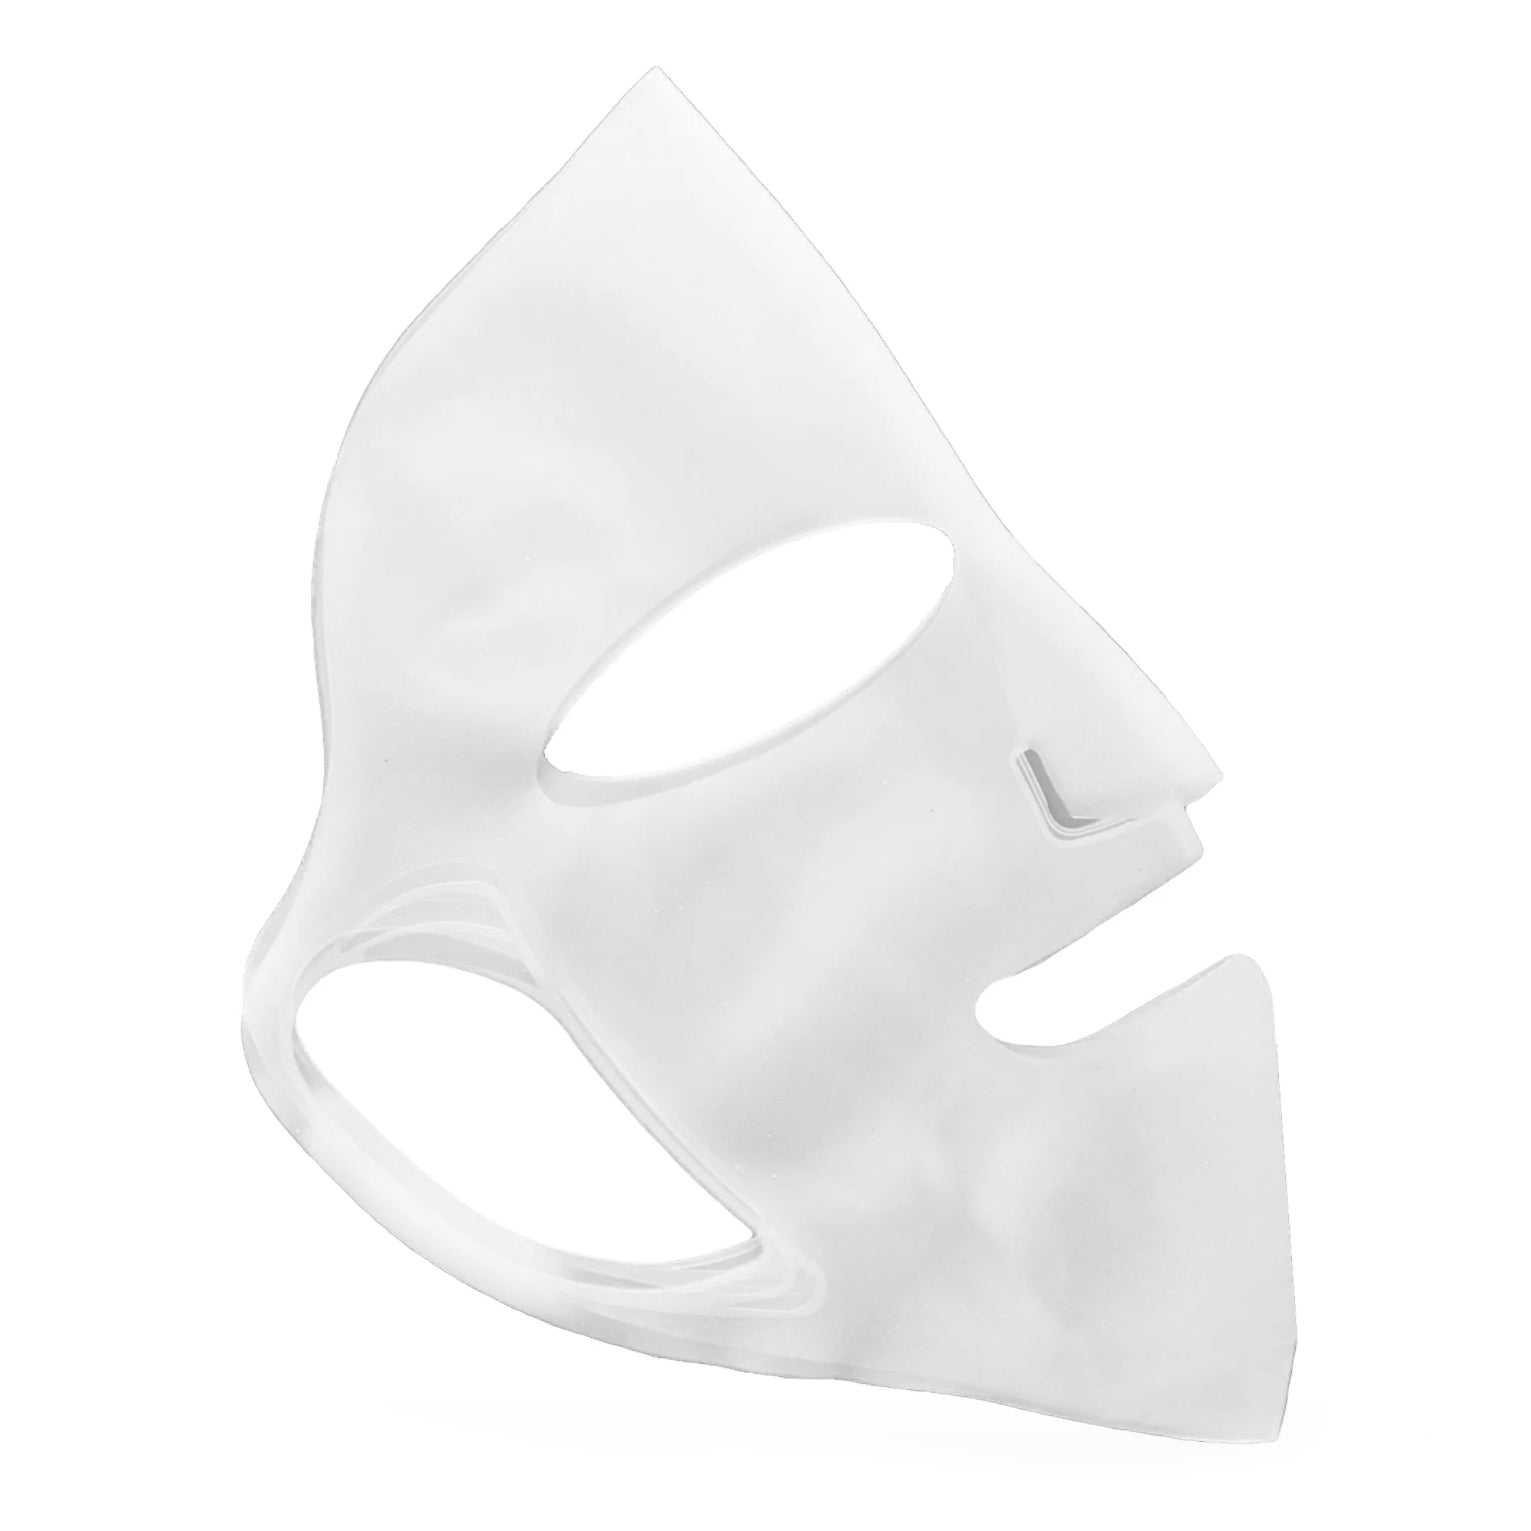 hydrating silicone face mask